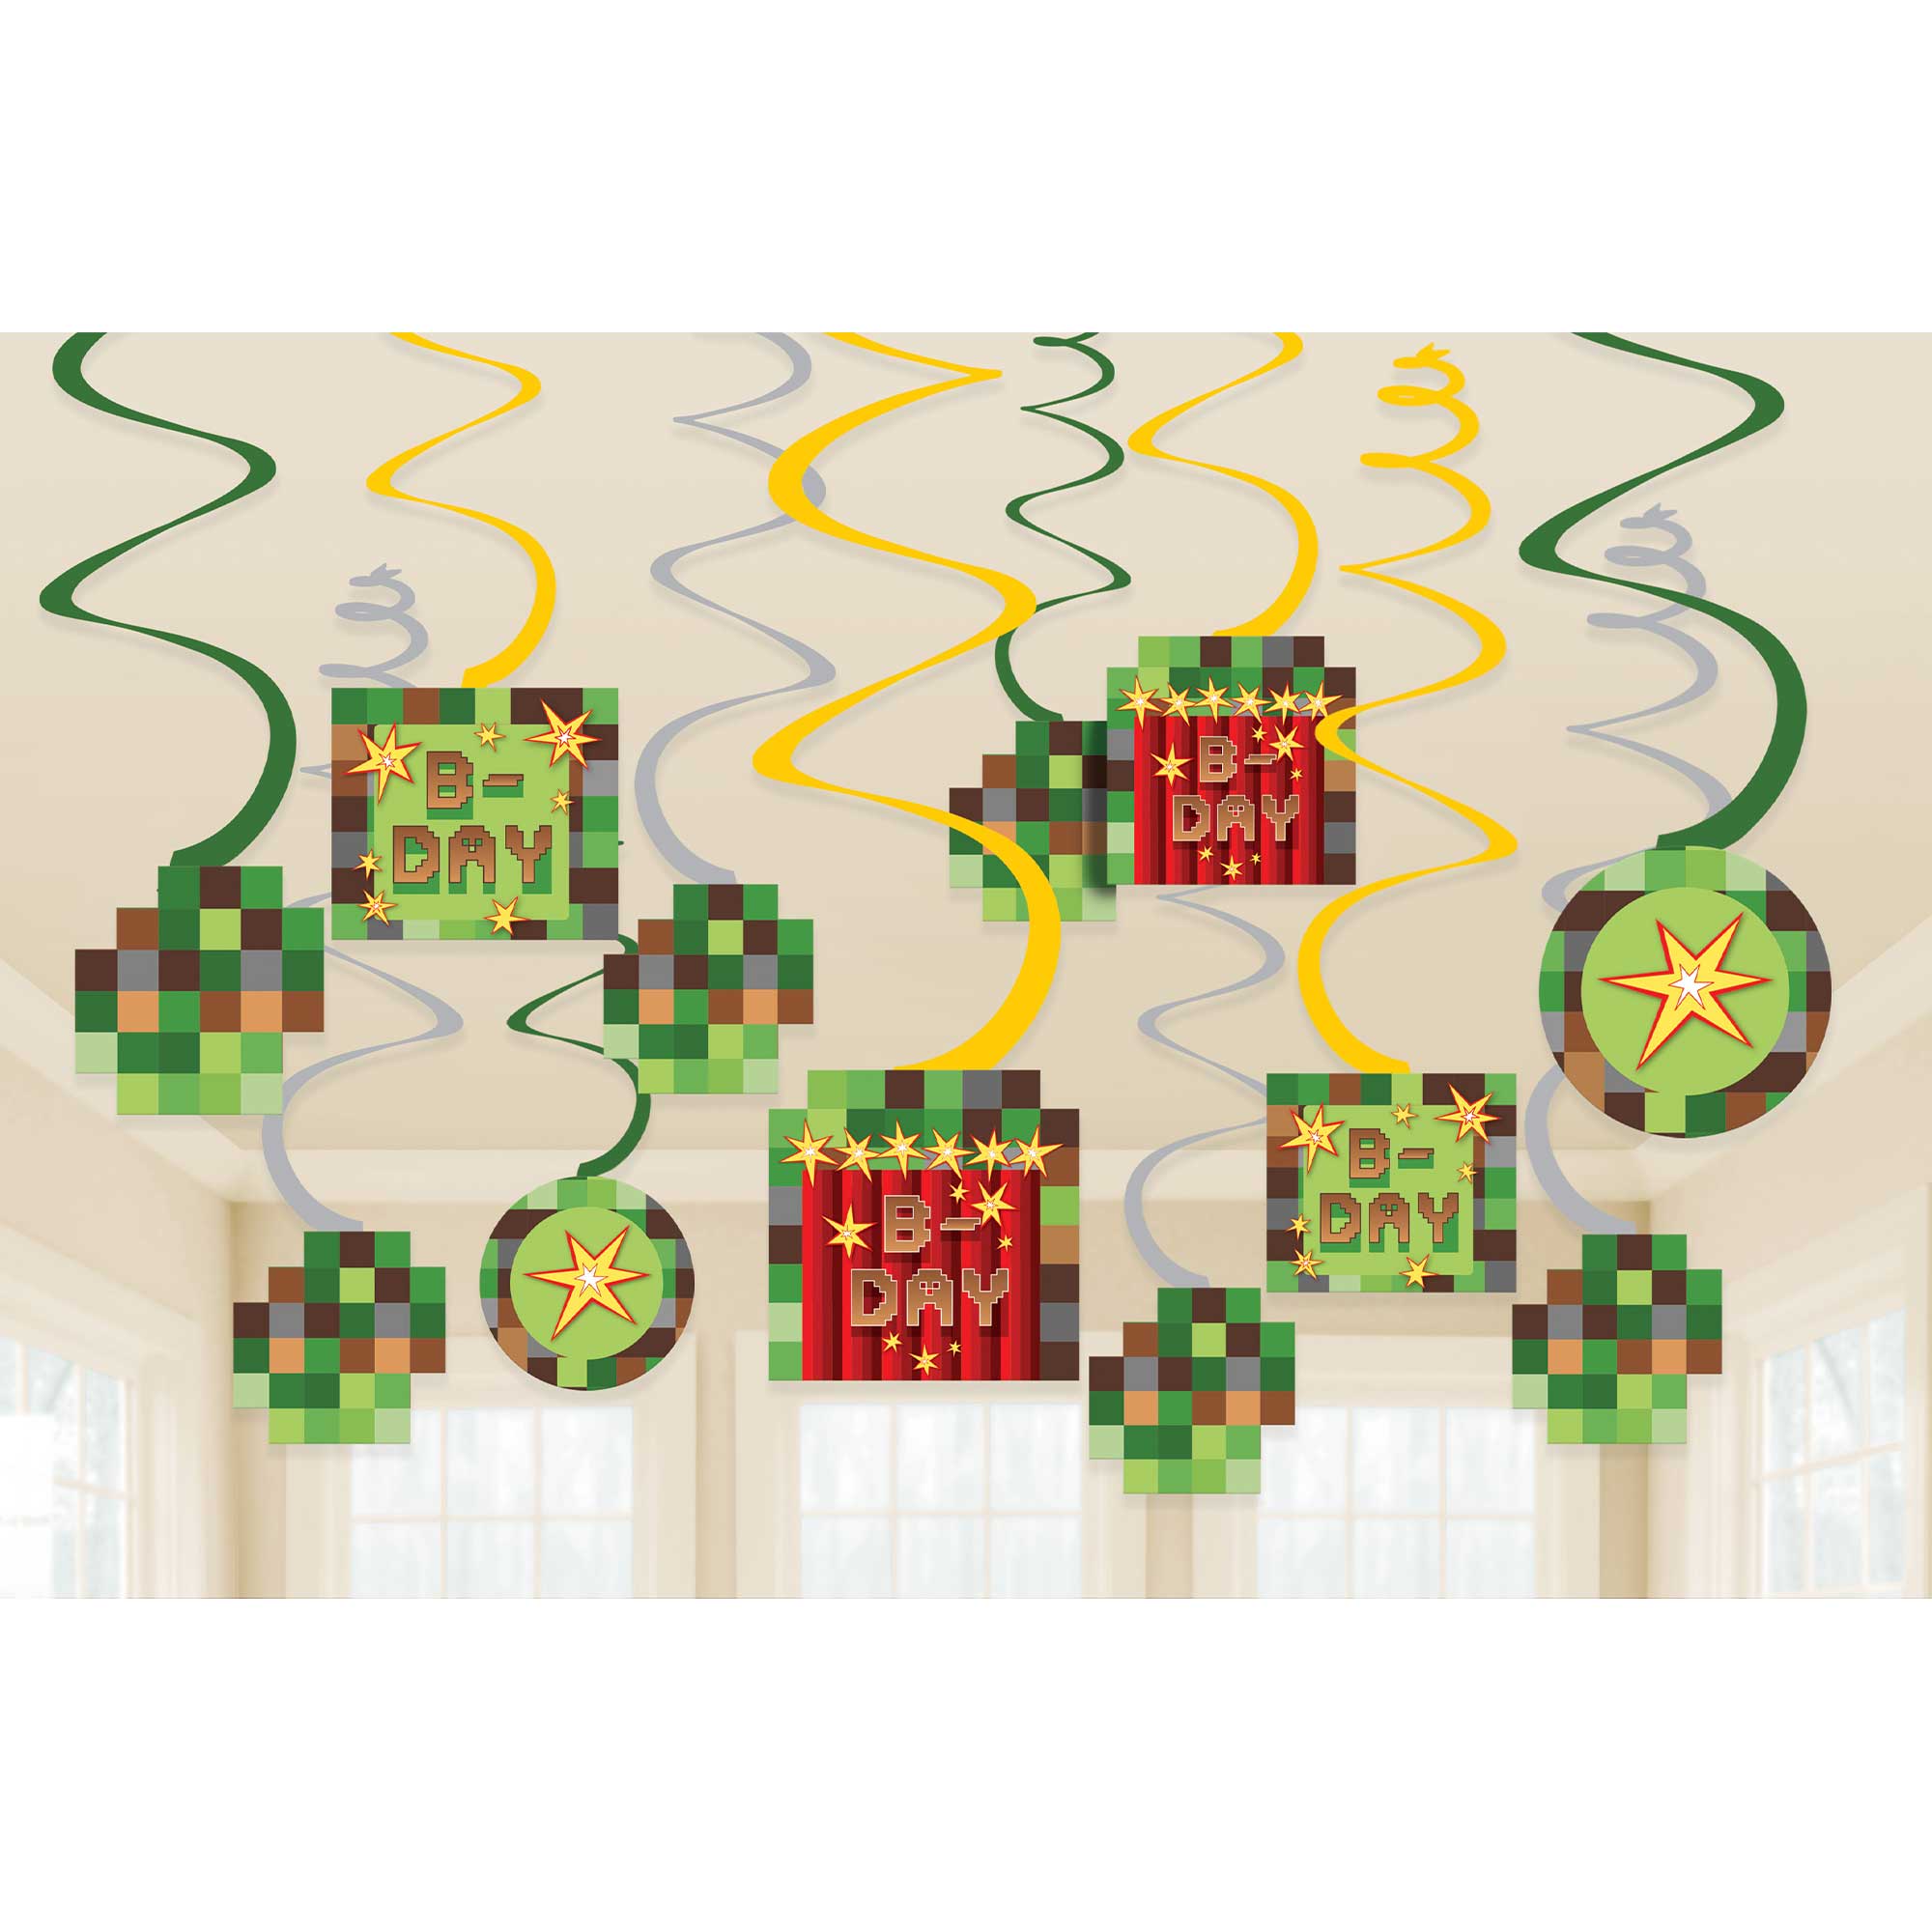 TNT Party! Spiral Swirls Hanging Decorations - 12 Pack Default Title